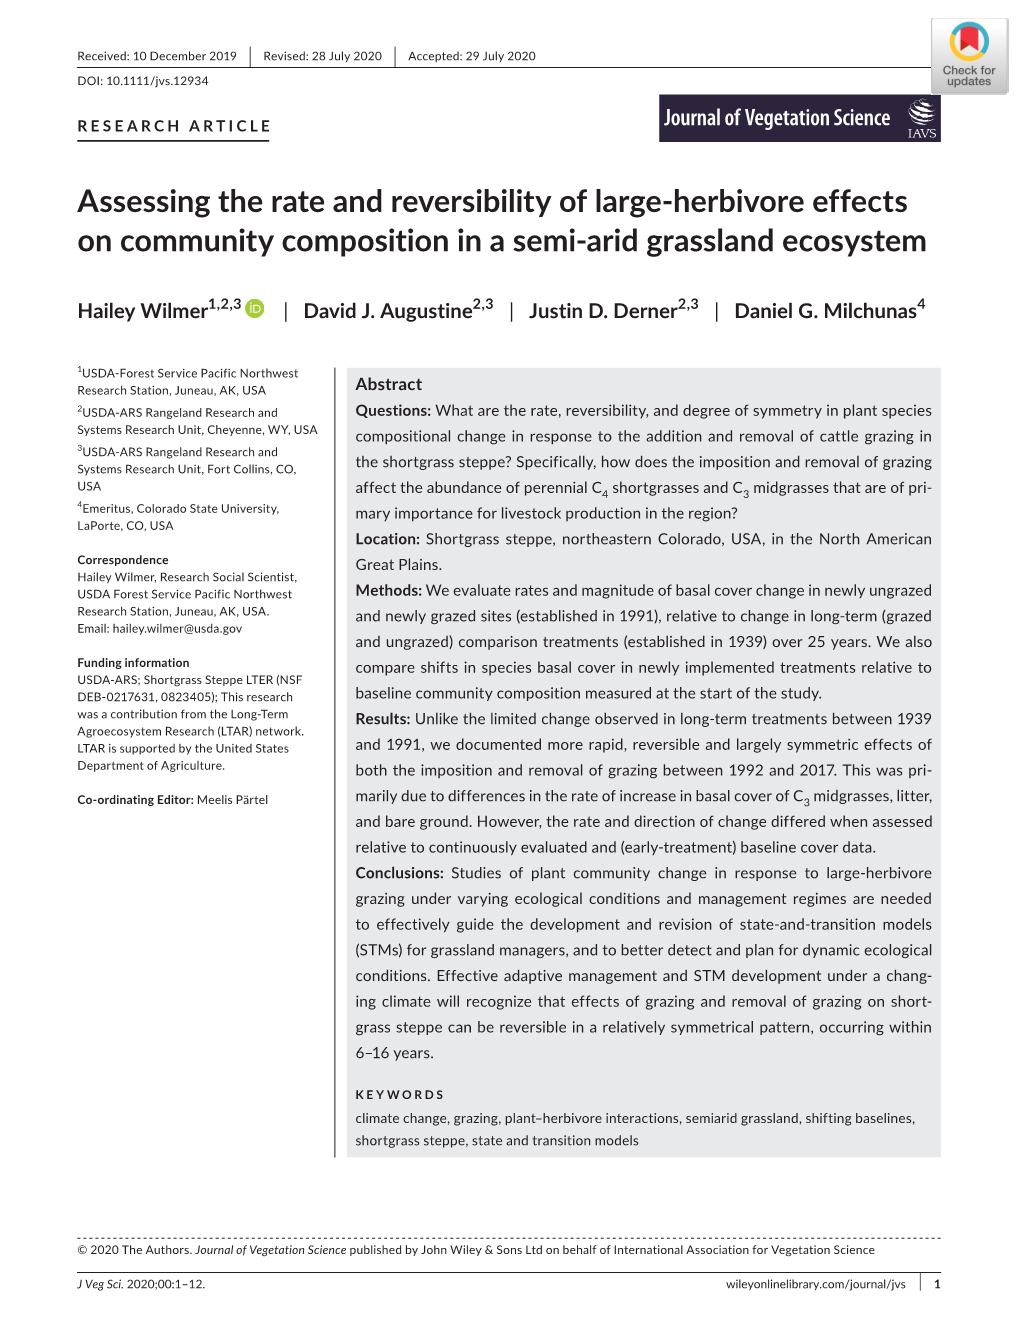 Assessing the Rate and Reversibility of Large‐Herbivore Effects On